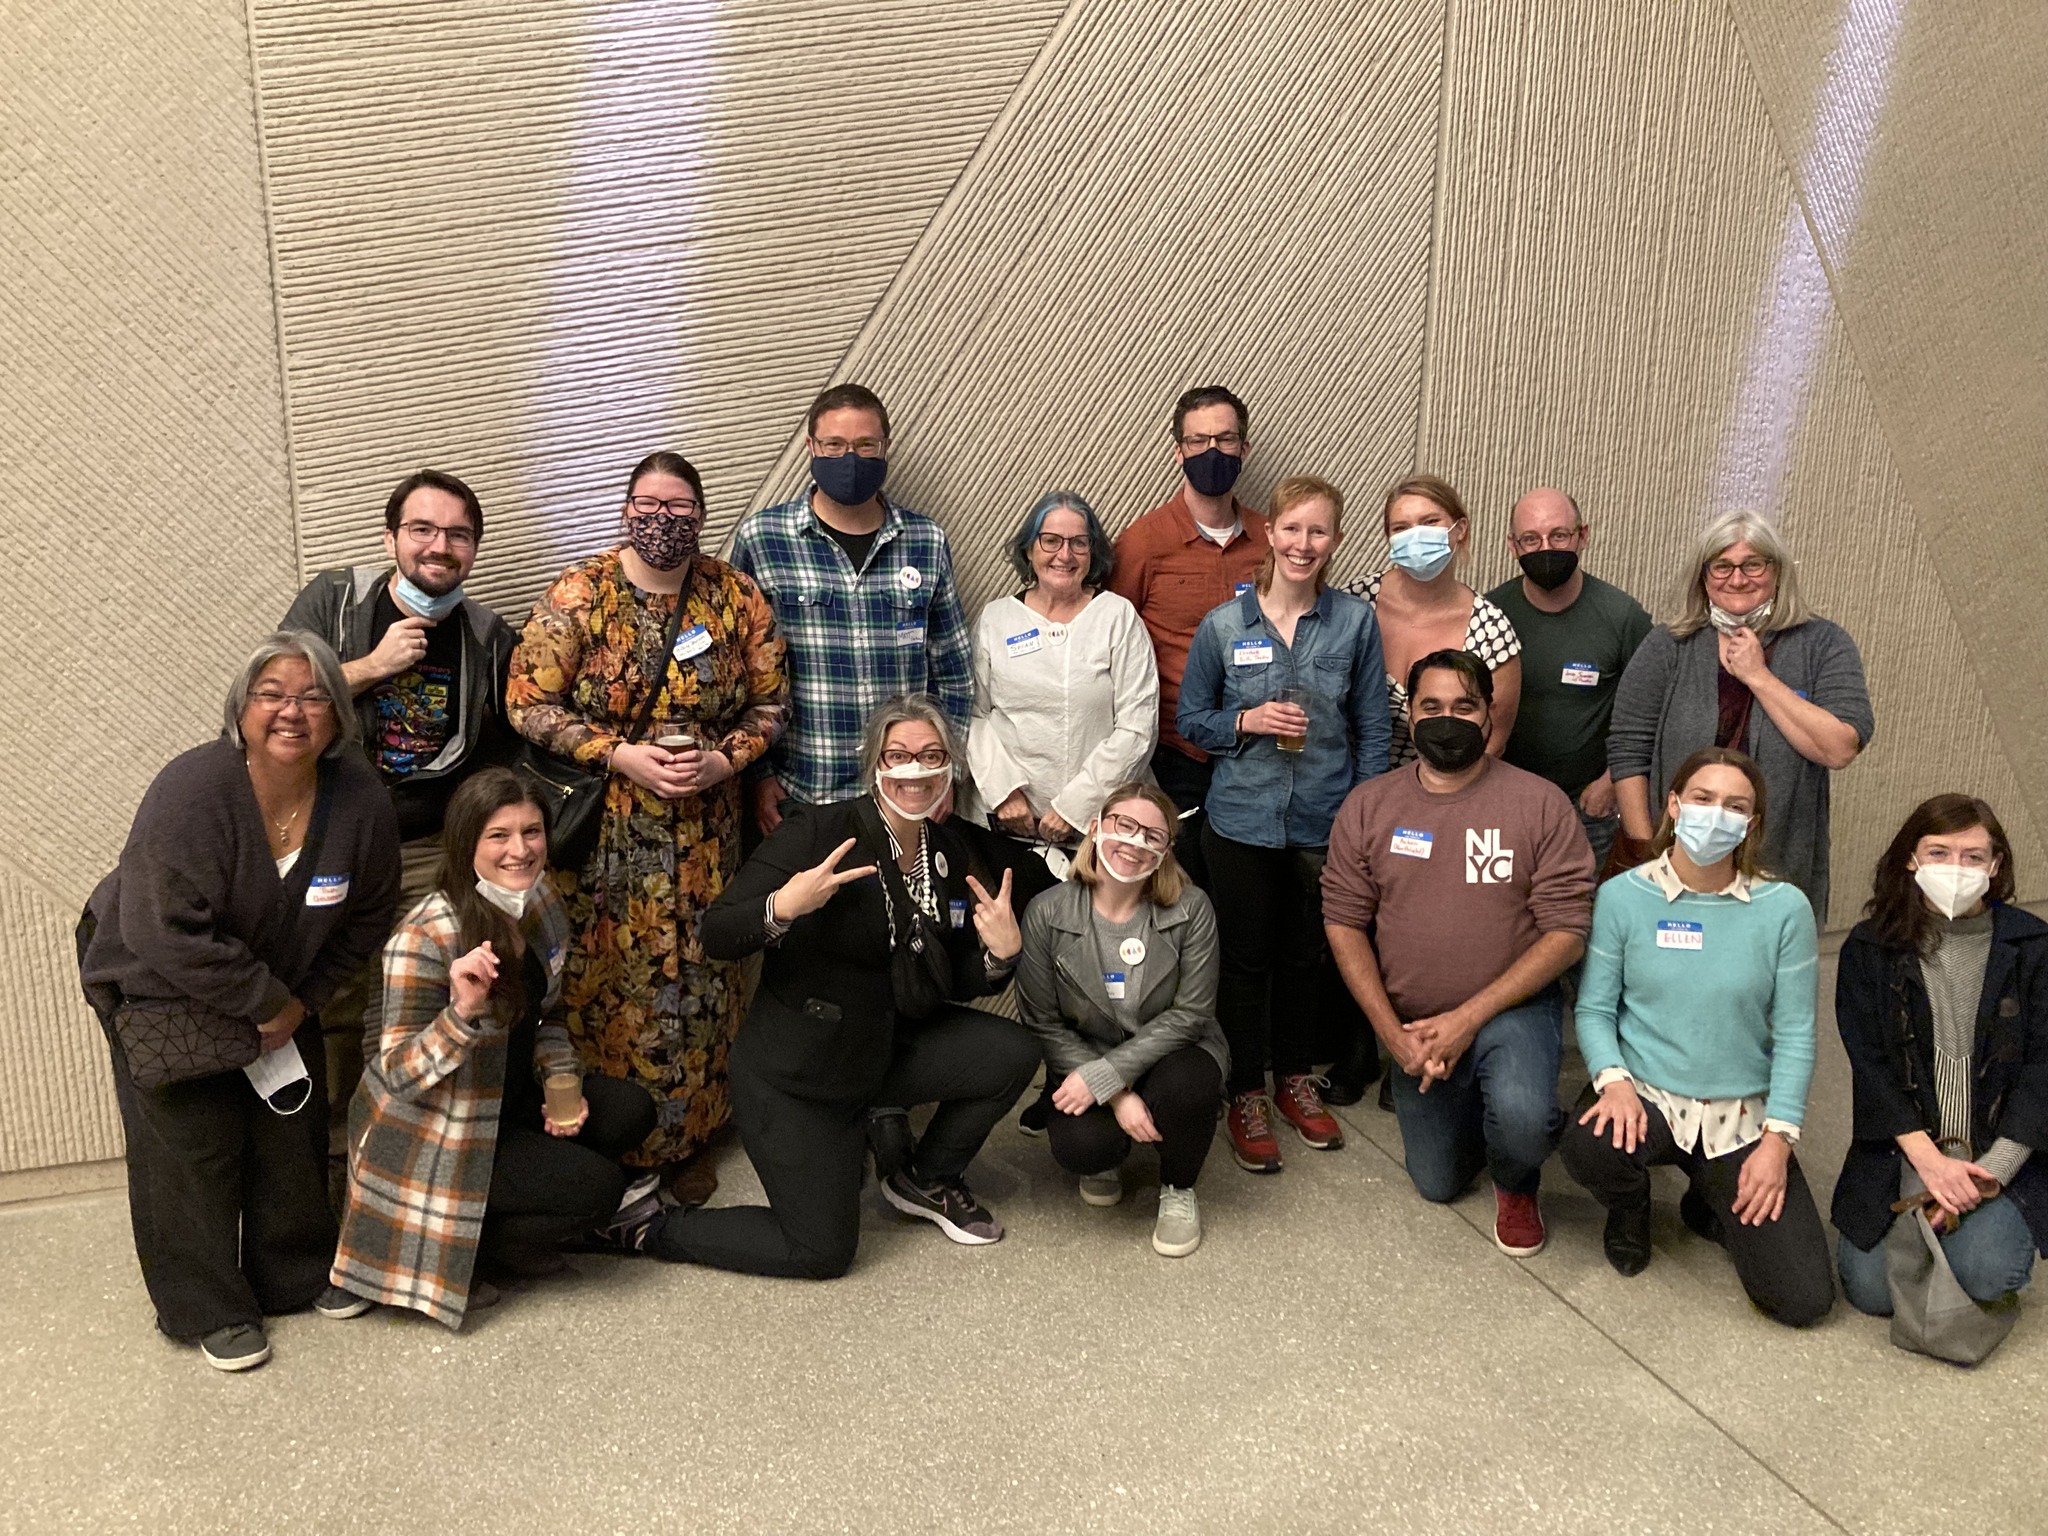 Group Photo. Sixteen attendees gather together and smile for the camera COVID style (with masks) at a Cultural Access Collab event.